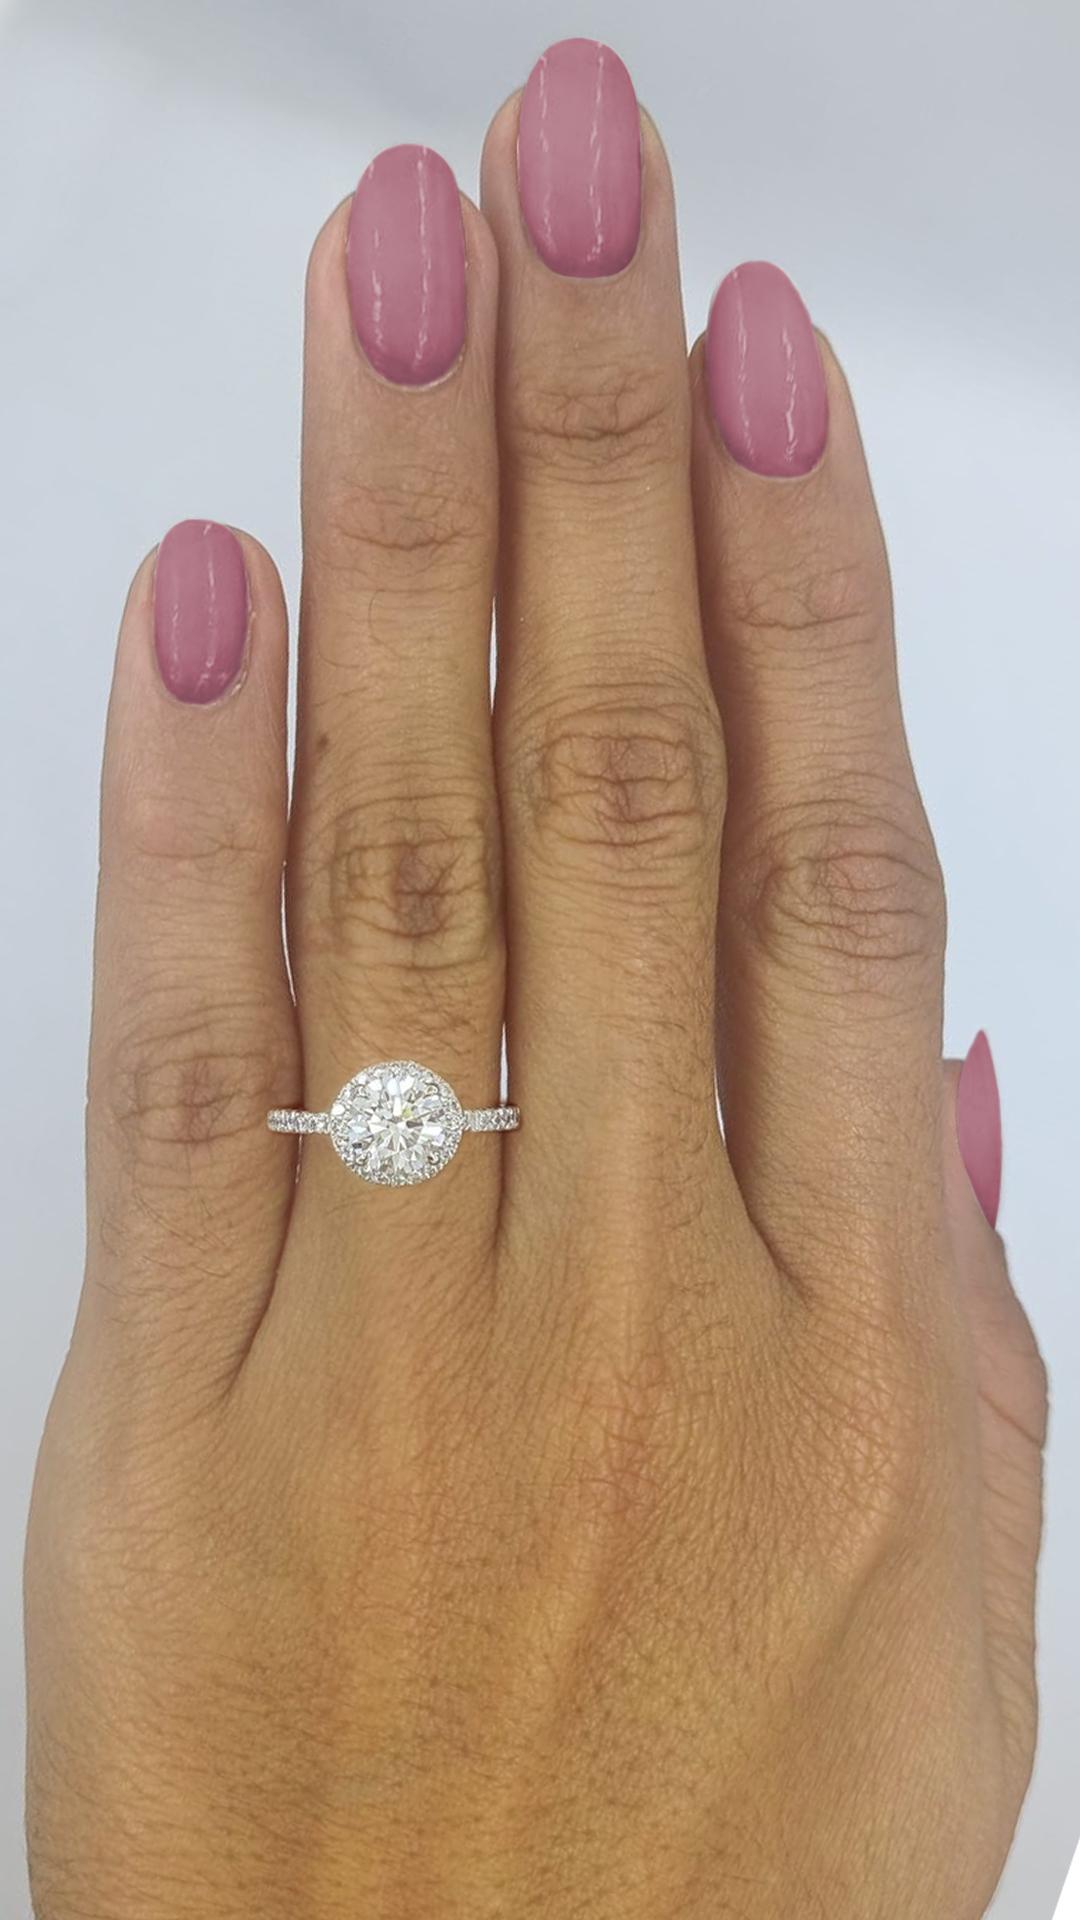 Tiffany & Co. Platinum Soleste 1.33 ct Round Ideal Cut Diamond Halo Engagement Ring.

The ring weighs 3.9 grams, size 9, the center stone is a Natural Round Brilliant Cut Diamond weighing 1.10 ct, F in color, VS1 in clarity
